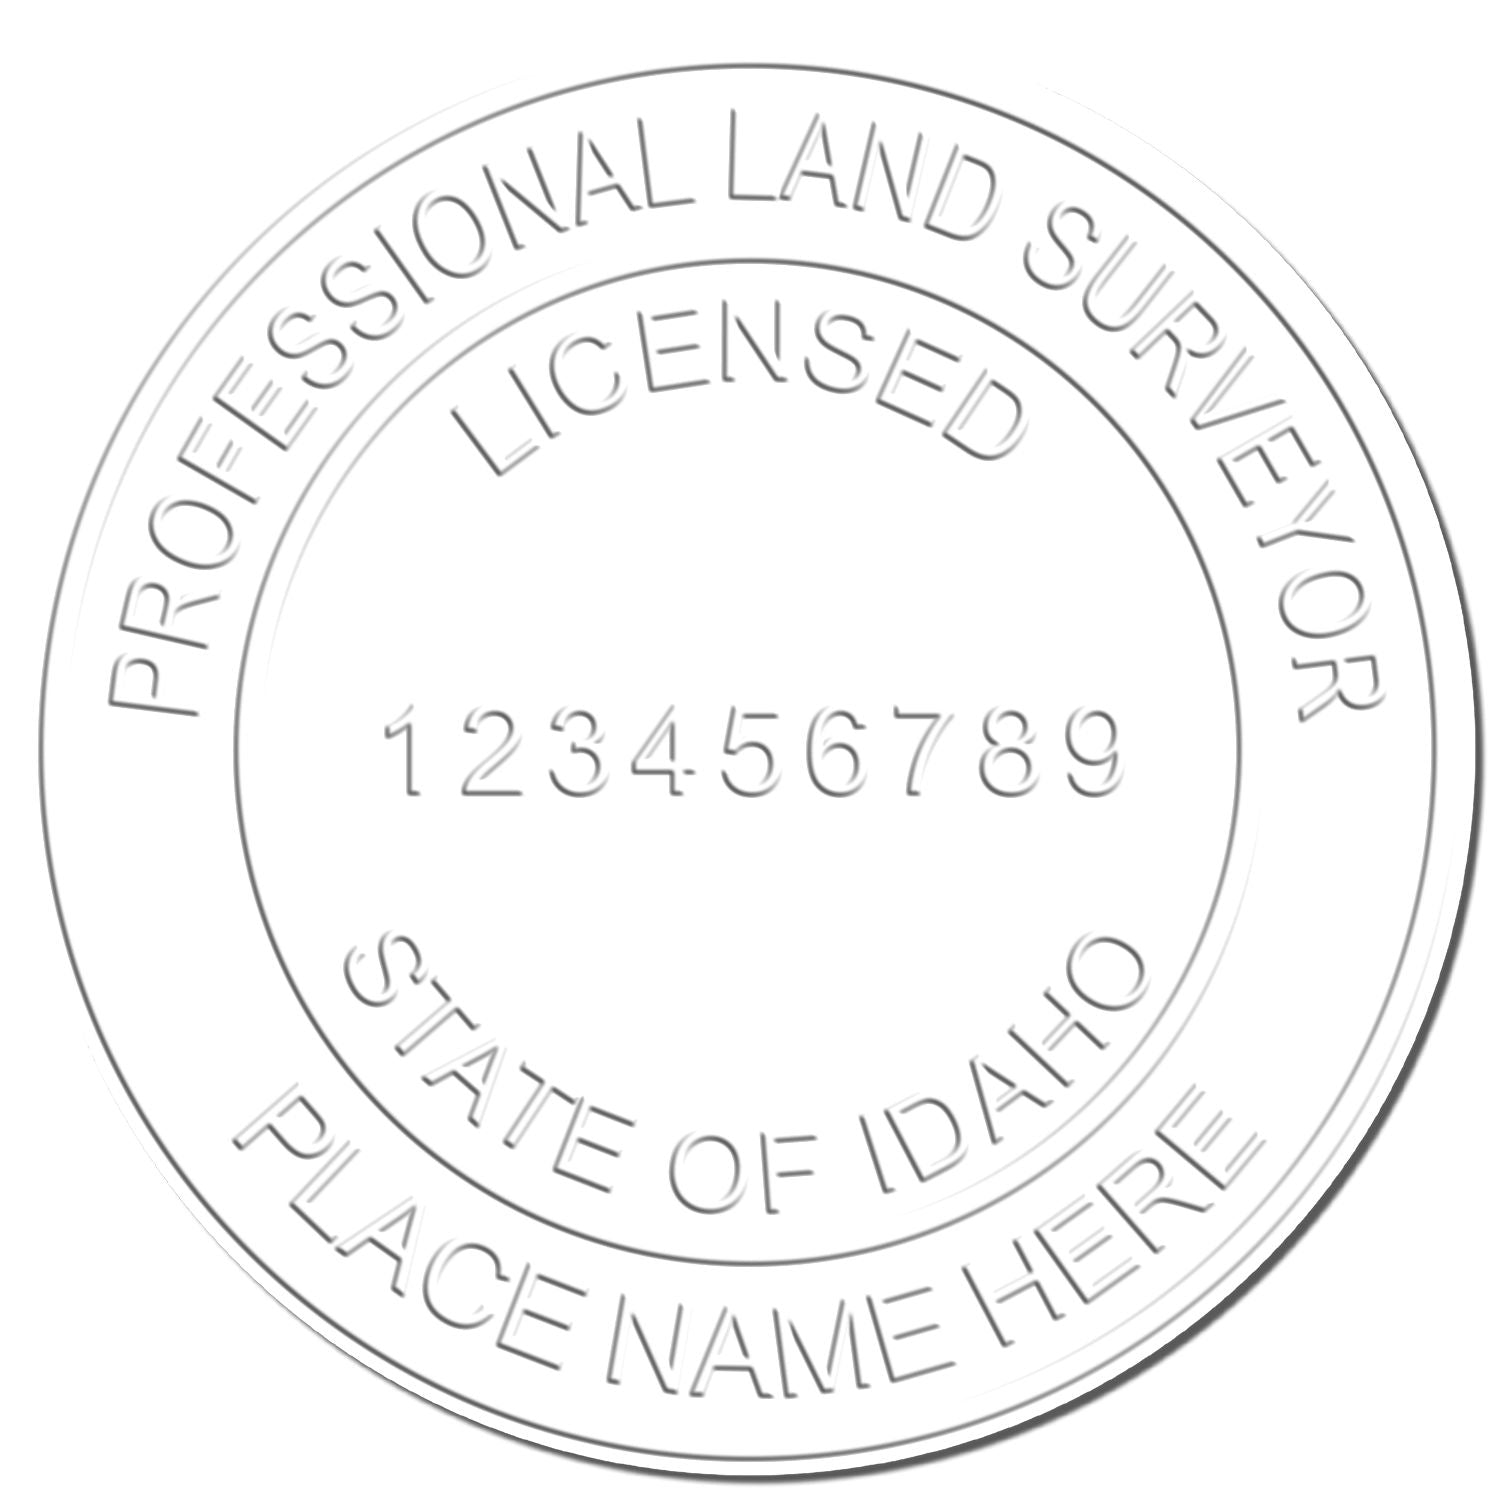 The main image for the Long Reach Idaho Land Surveyor Seal depicting a sample of the imprint and electronic files